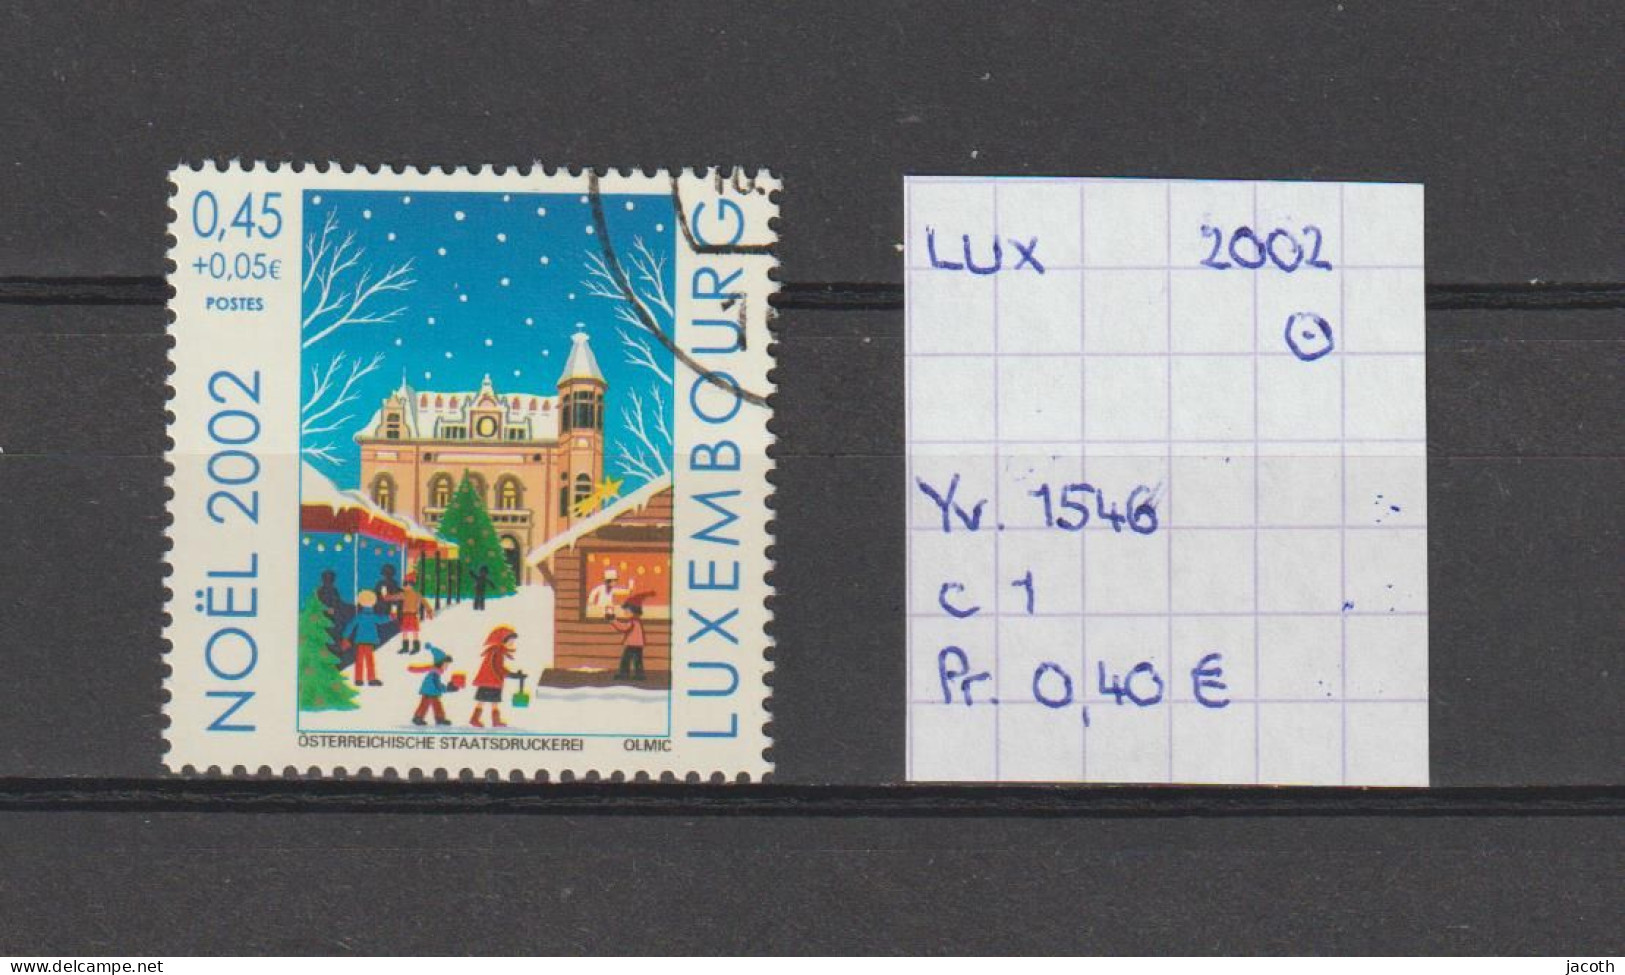 (TJ) Luxembourg 2002 - YT 1546 (gest./obl./used) - Usados